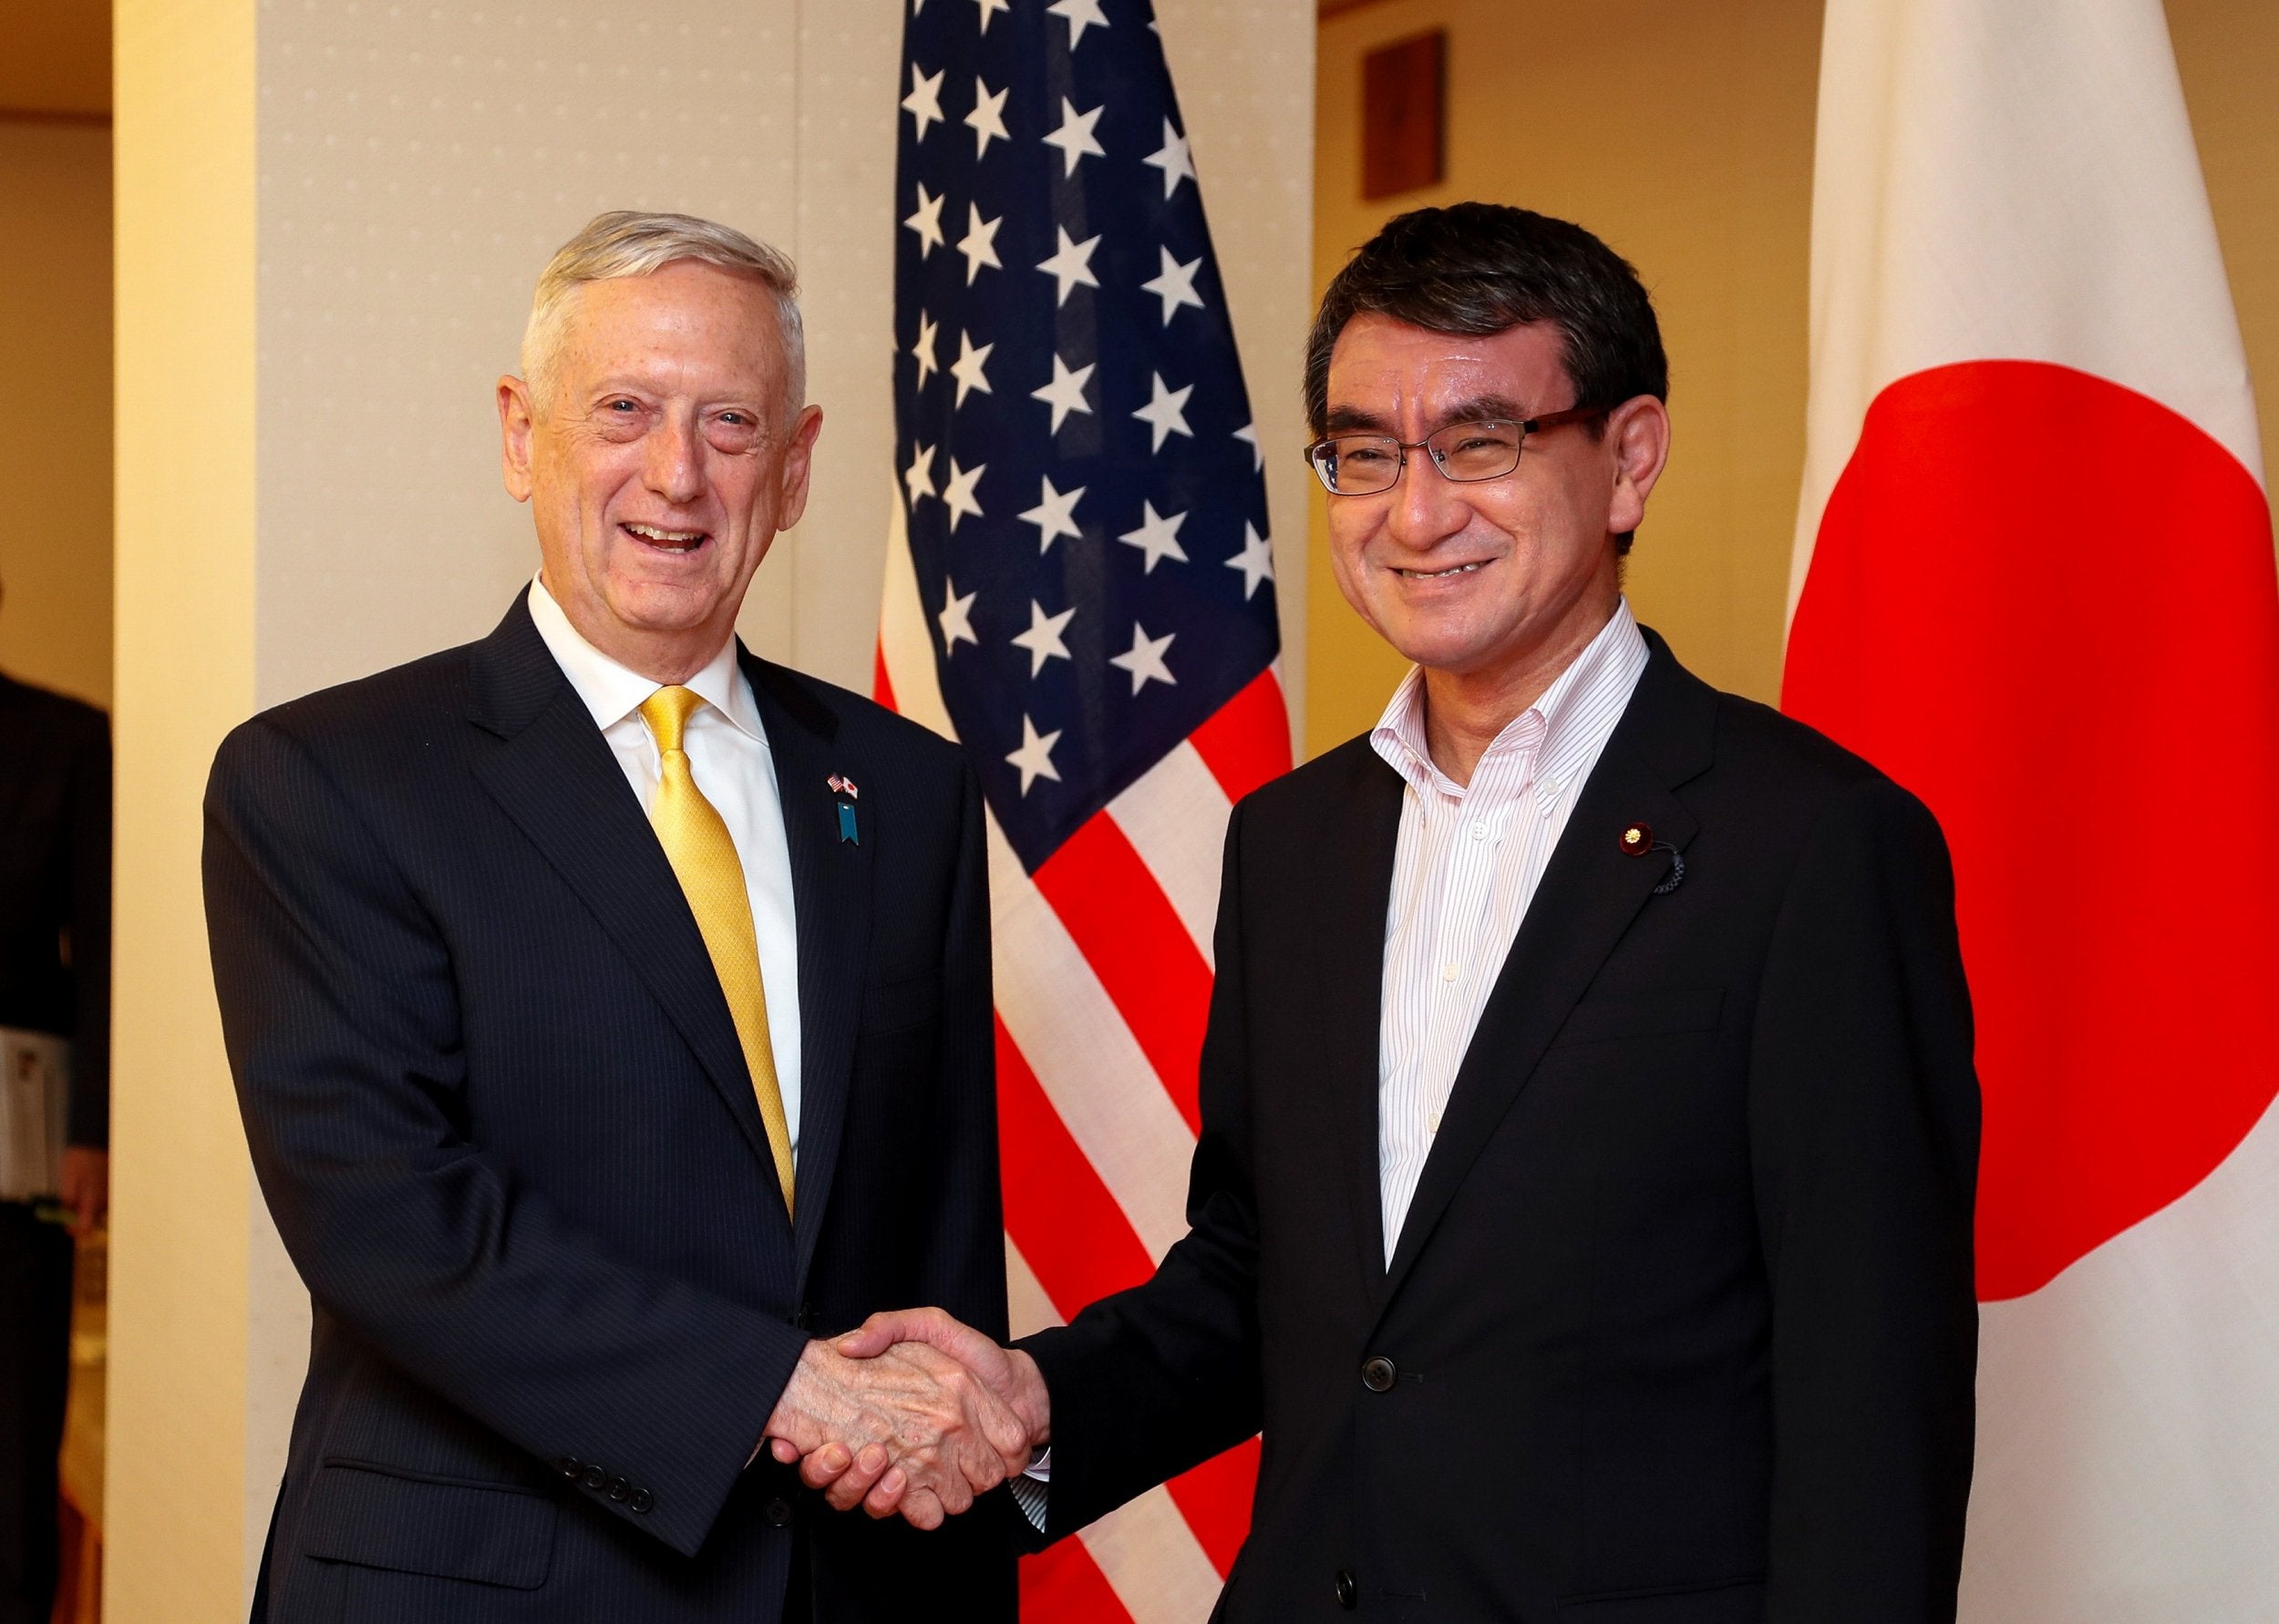 James Mattis, the US secretary of defence, shakes hands with Japan's foreign minister, Taro Kono, in Tokyo